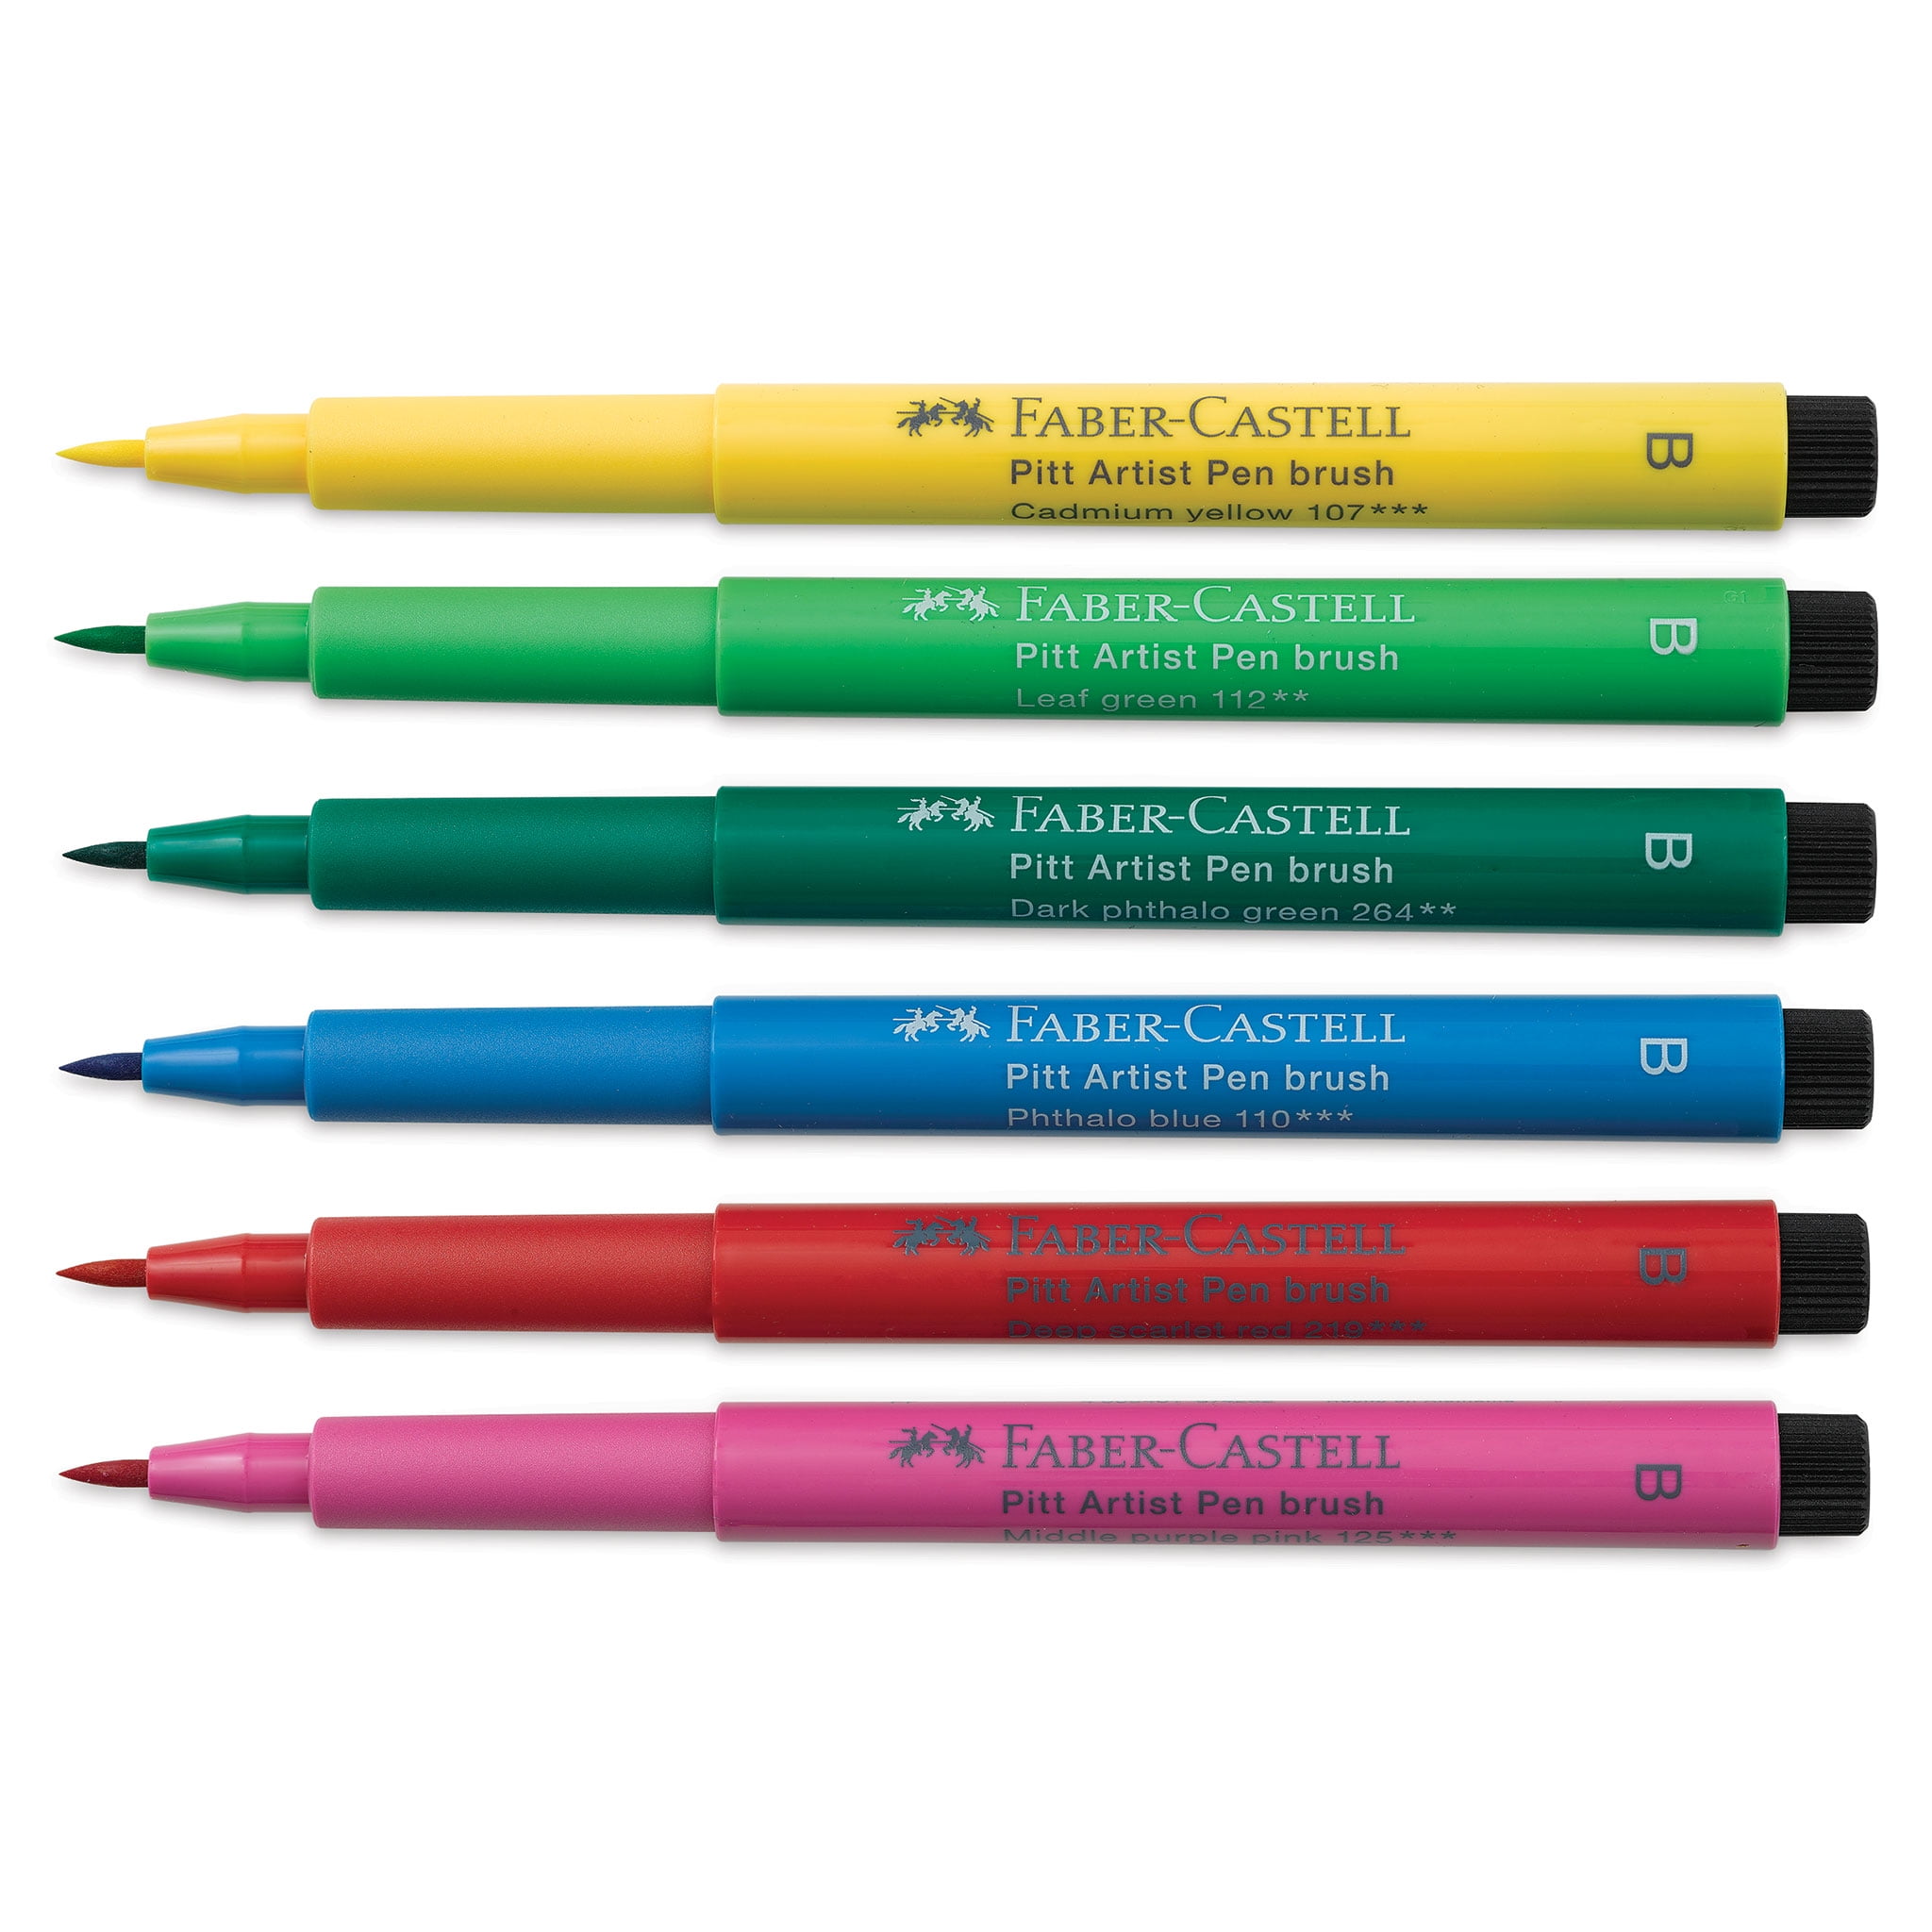 Another look at the Faber-Castell School pen.